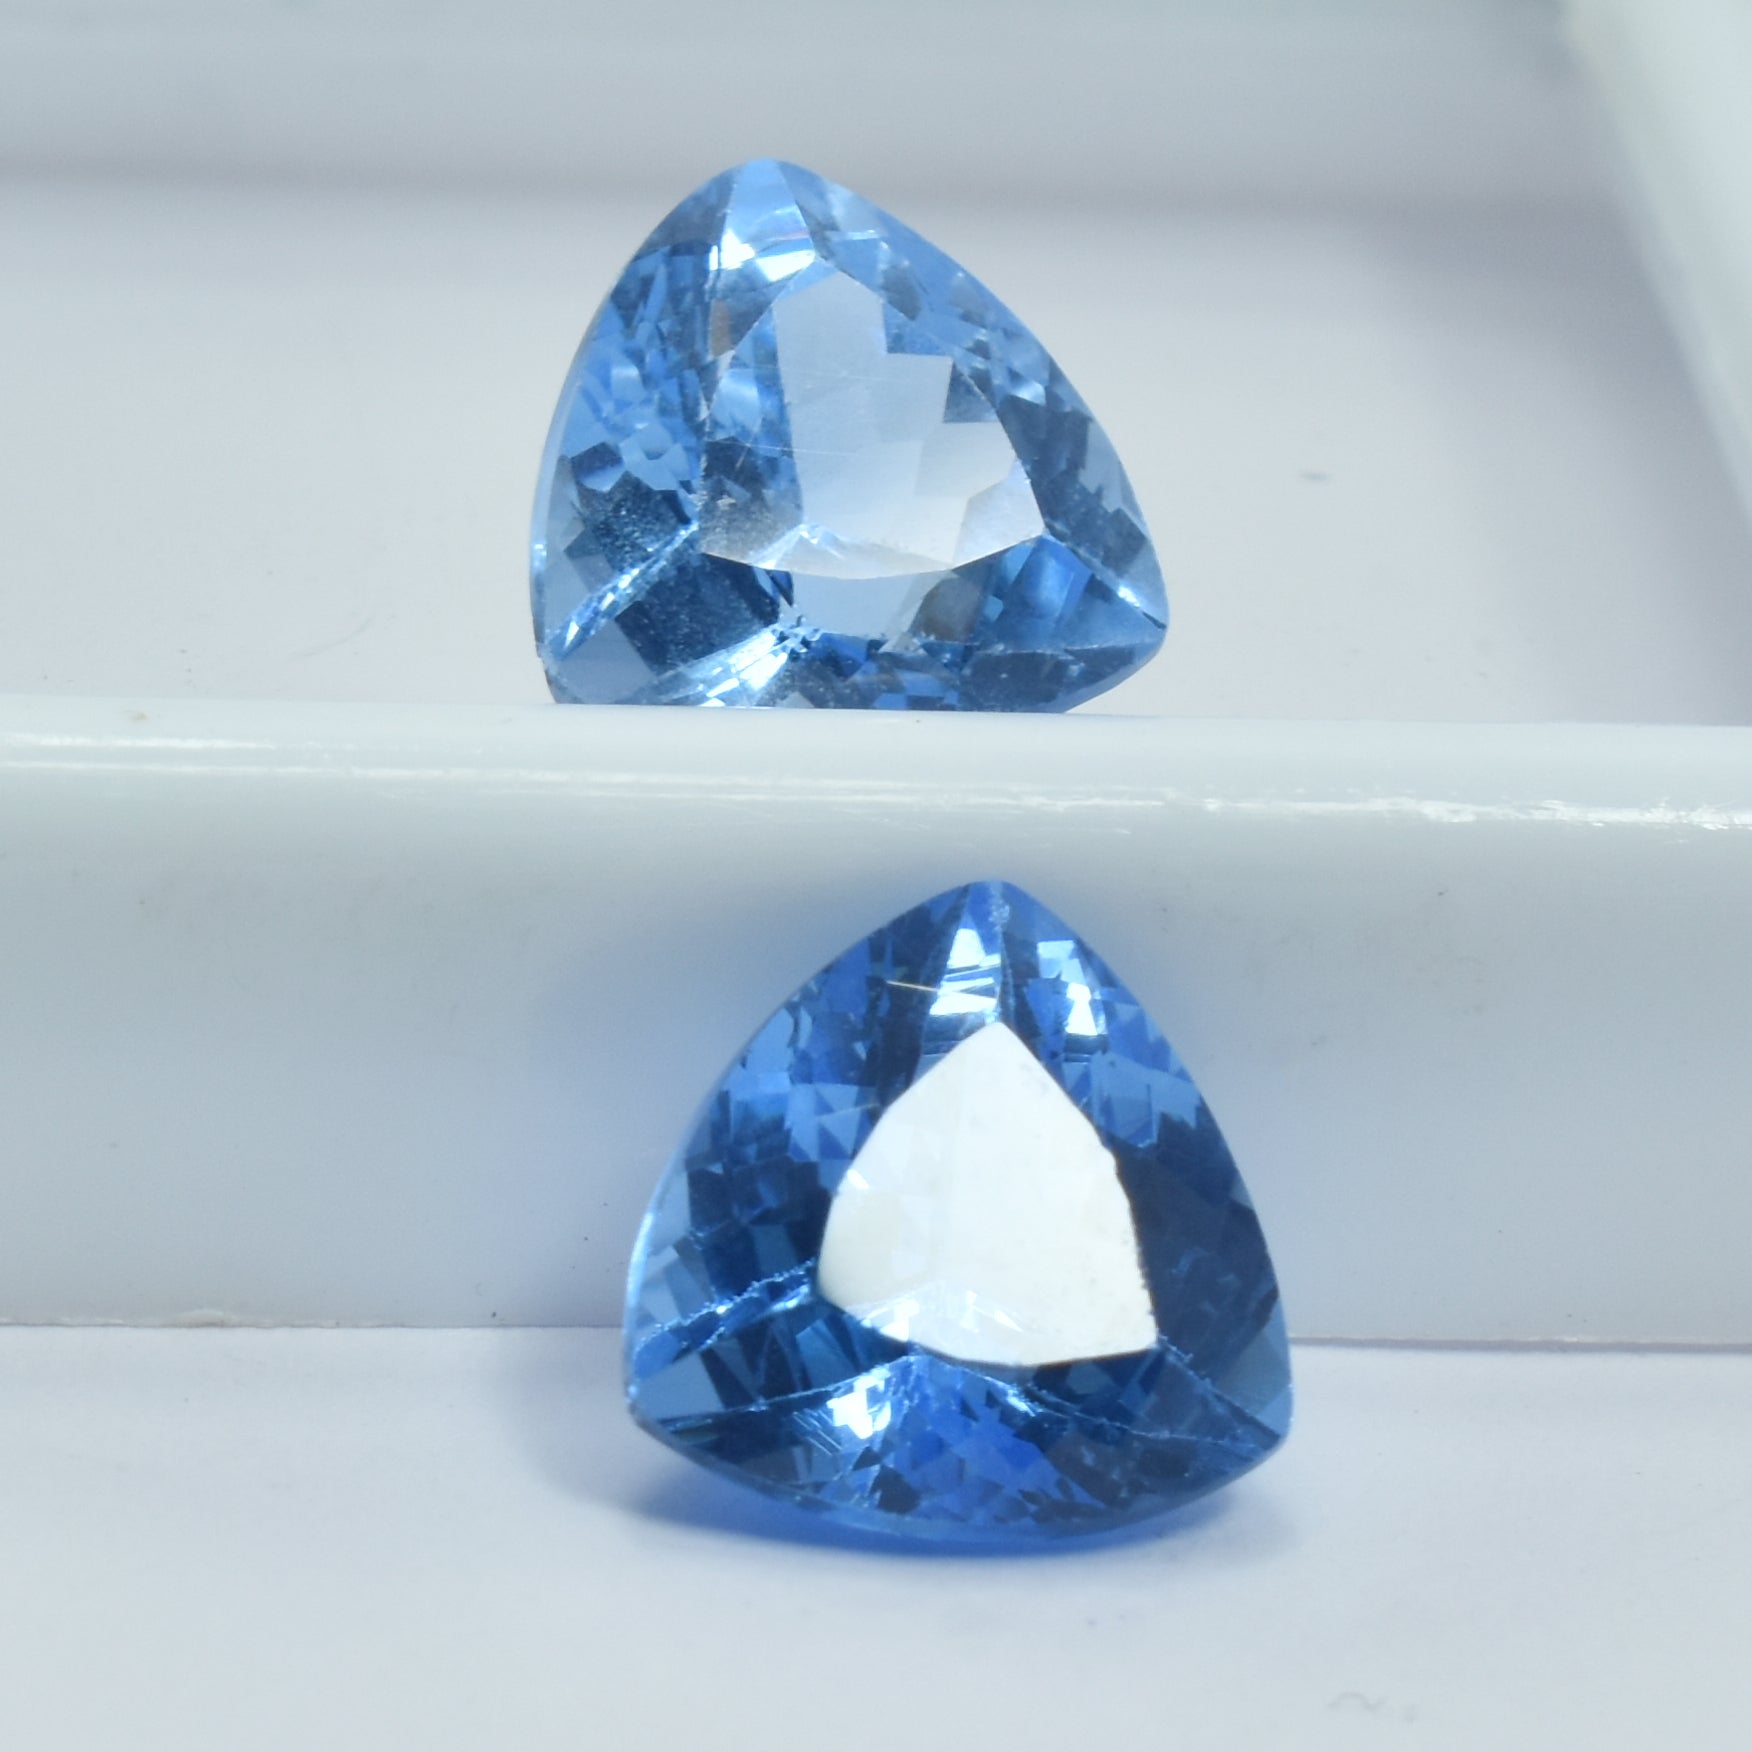 BEST SALE !! Extremely Rare NATURAL Lite Blue Sapphire Trillion Shape 18.62 Ct CERTIFIED Pair Loose Gemstone Trillion Blue Sapphire Excellent For Making Earring Size Loose Gemstone Ring Size Stone